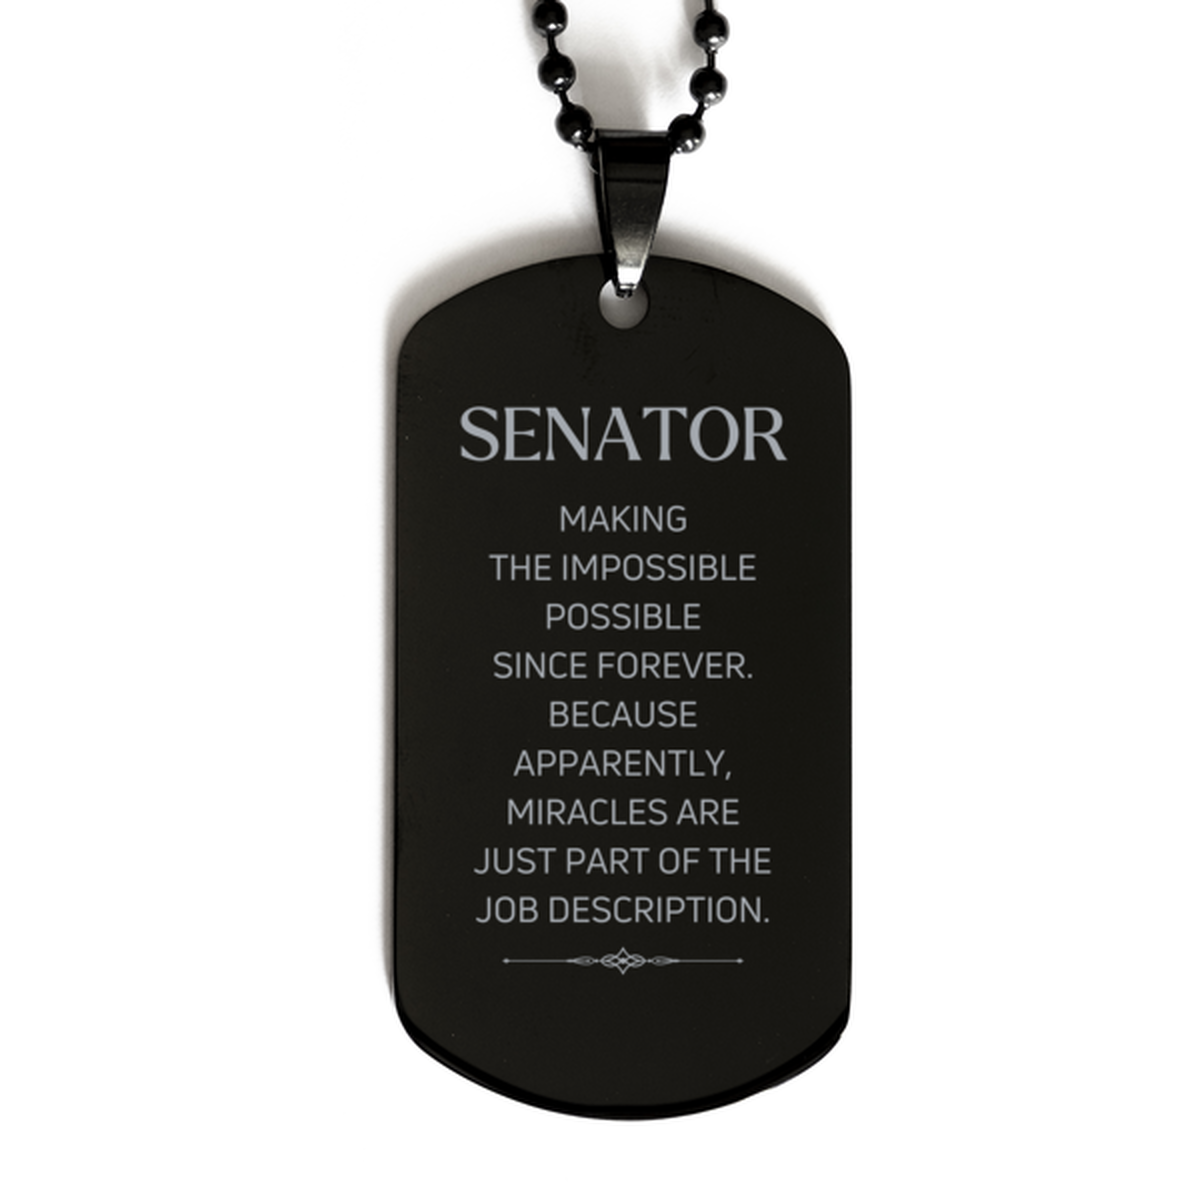 Funny Senator Gifts, Miracles are just part of the job description, Inspirational Birthday Black Dog Tag For Senator, Men, Women, Coworkers, Friends, Boss